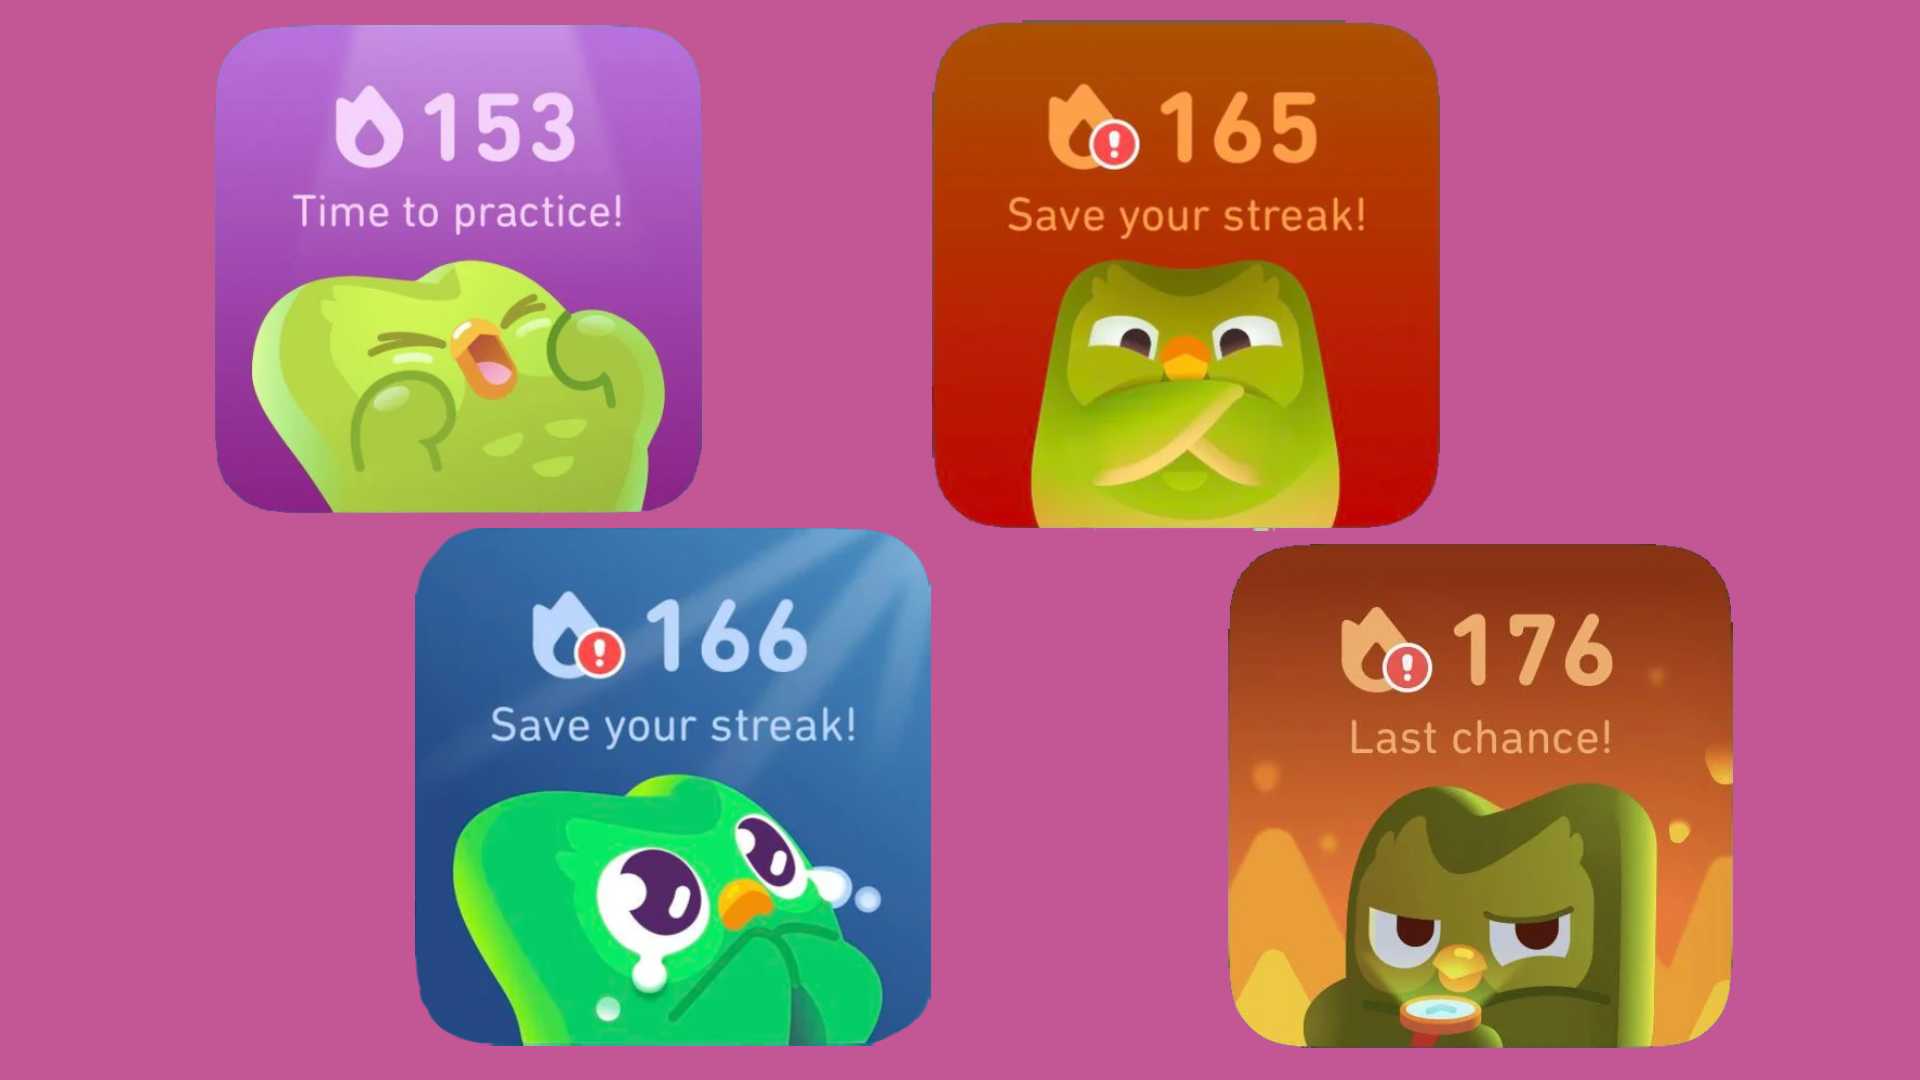 The Duolingo widget shows Duo looking determined, then angry, then crying tears of sadness, and then surrounded by fire as the bird's watch glows.